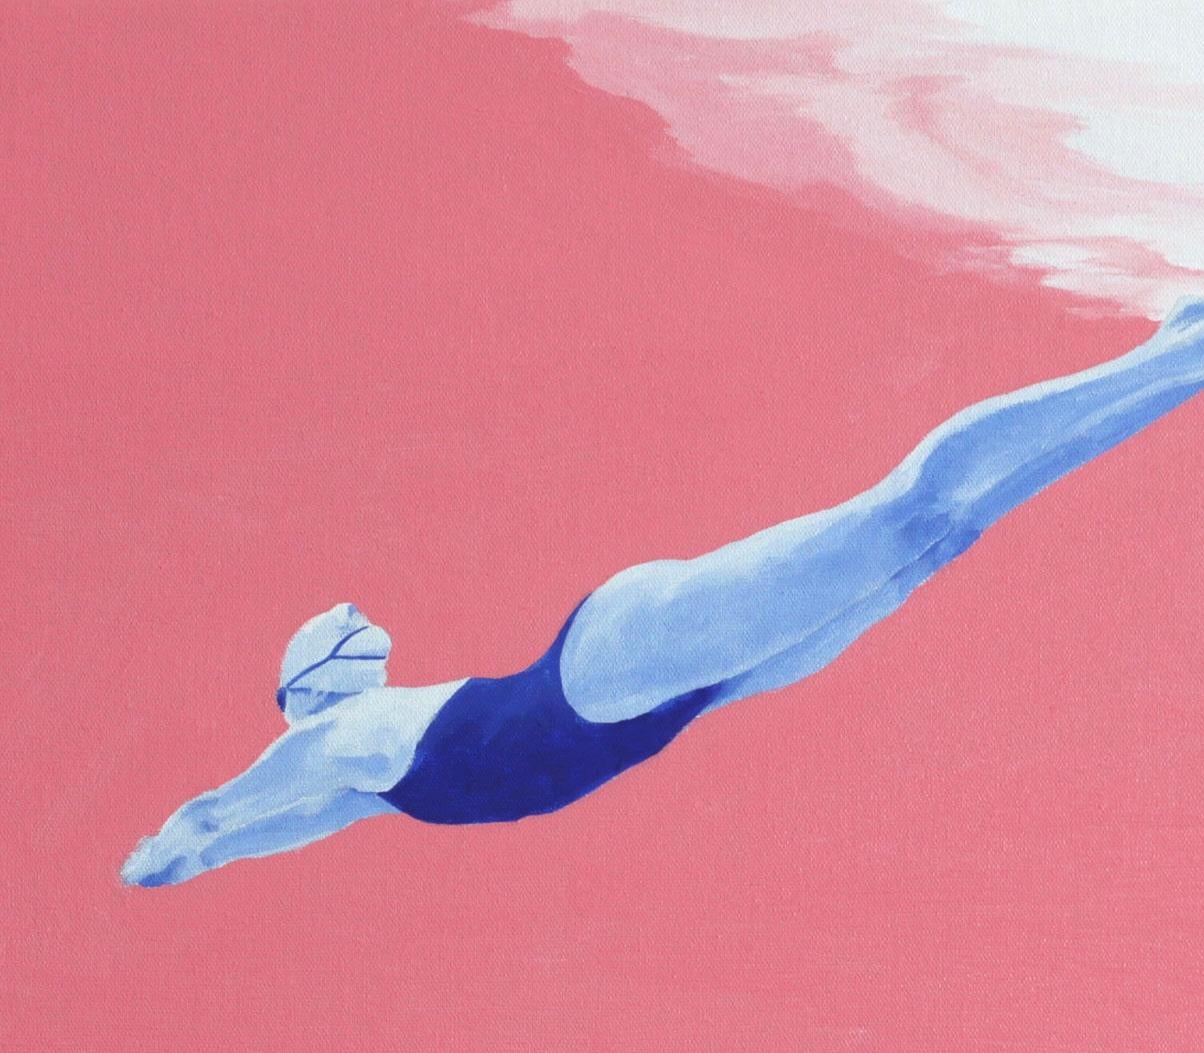 This beautiful minimalist figurative painting by Ana is from her latest body of works.
It is acrylic on canvas and comes signed dated along with a certificate of authenticity.
